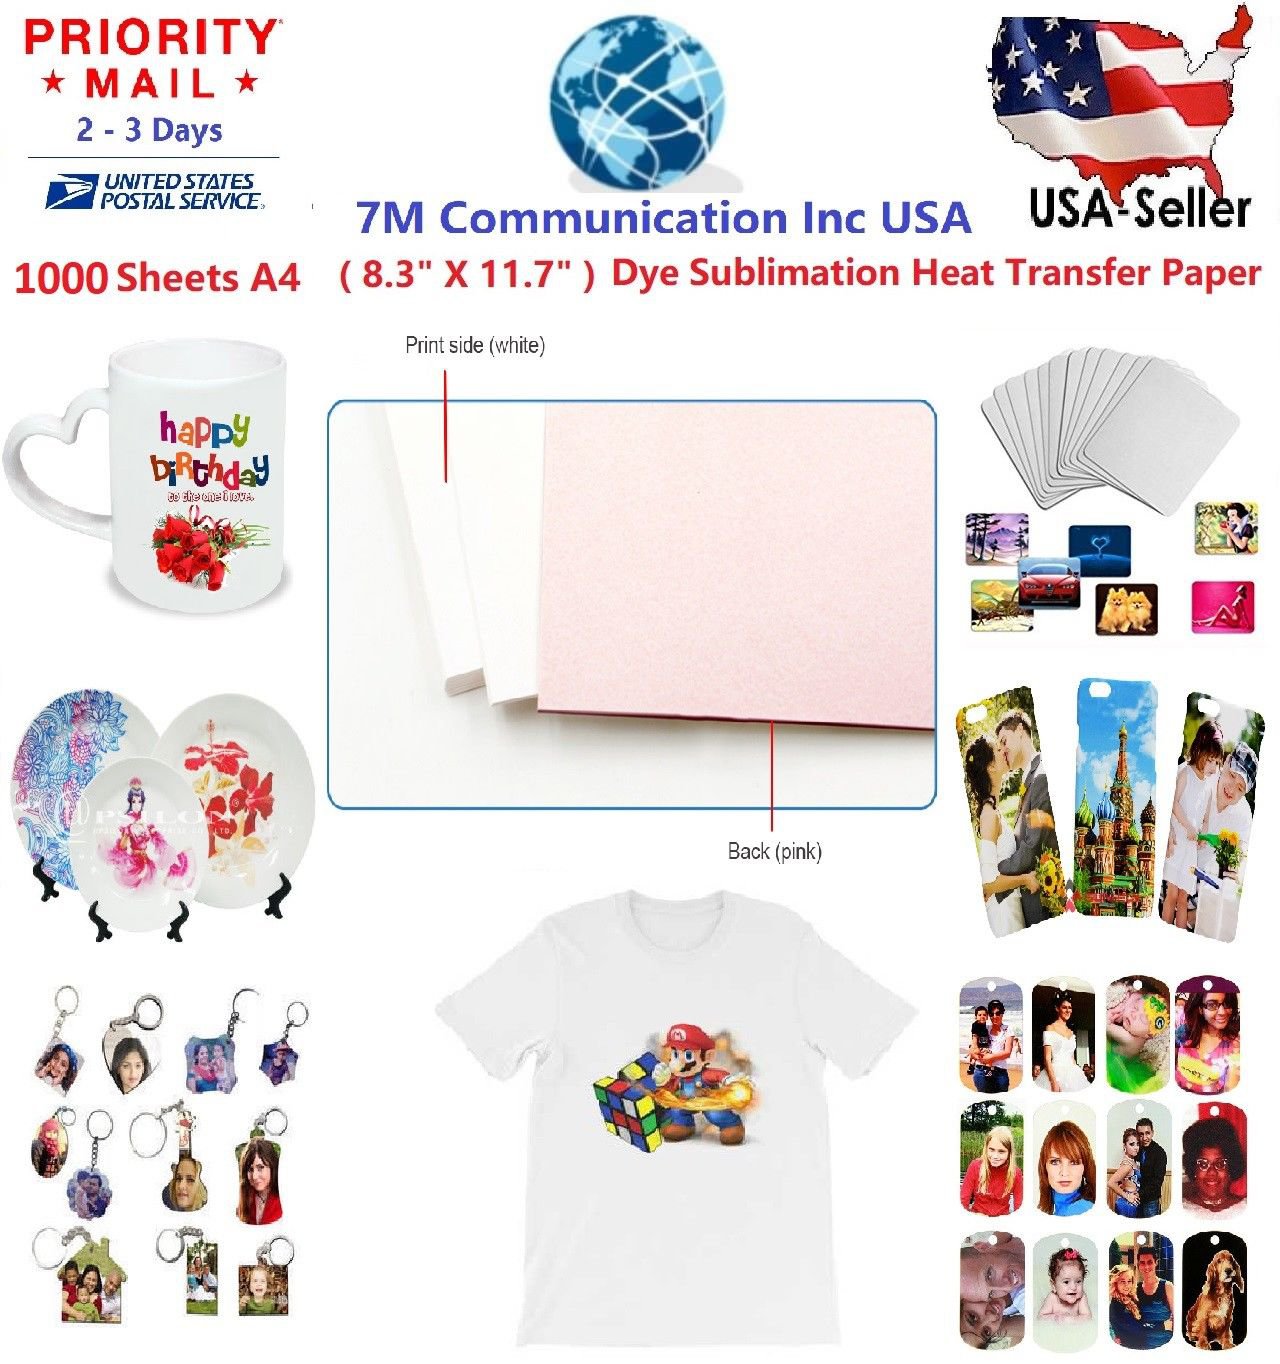 1000 Sheets A4 Dye Sublimation Heat Transfer Paper for Polyester Cotton T- Shirt